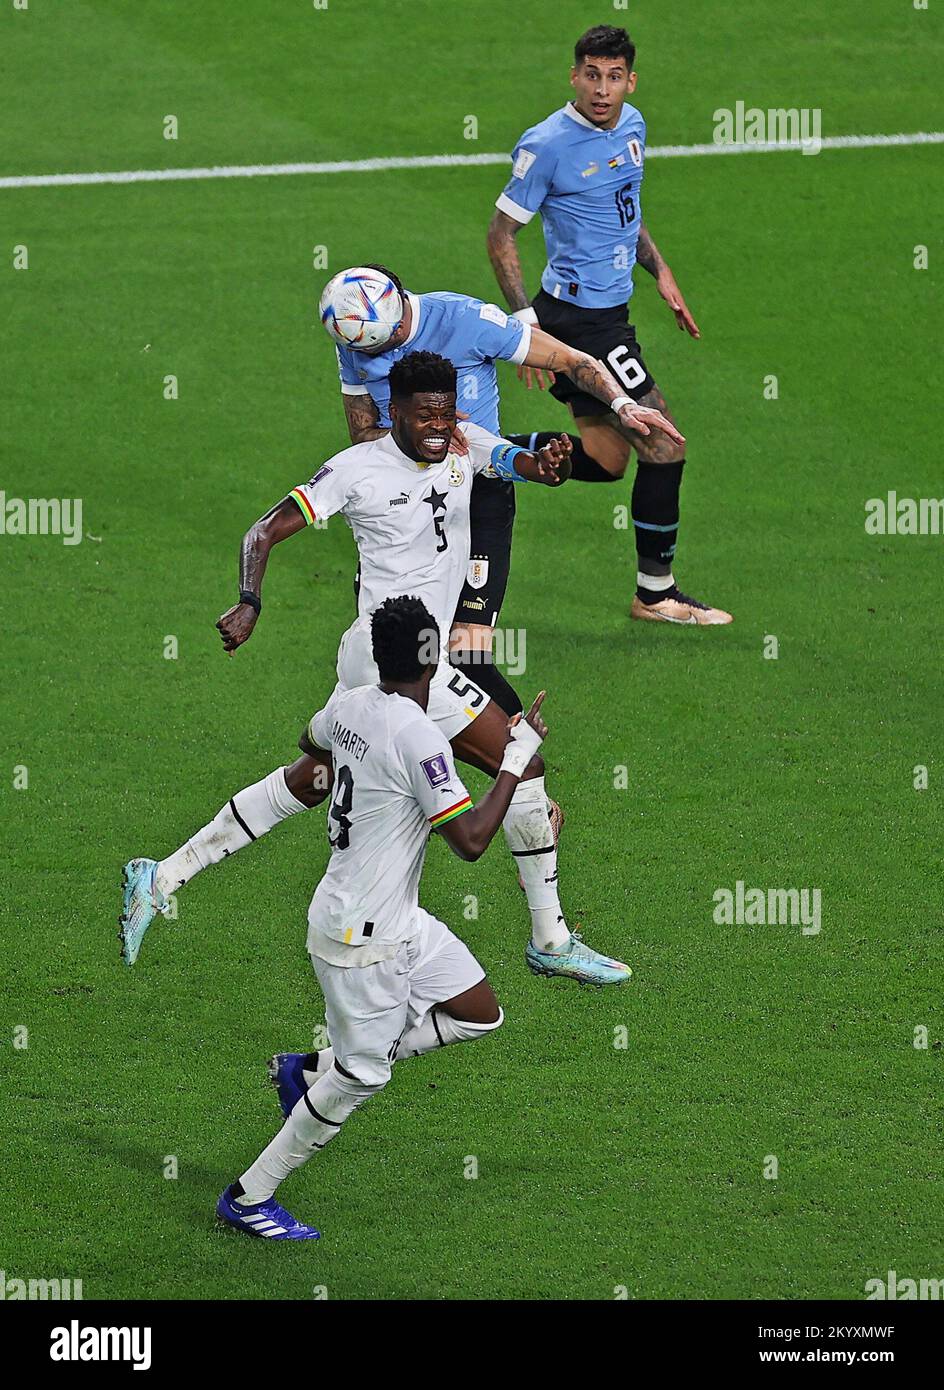 Doha, Qatar. 02nd Dec, 2022. Thomas Partey of Ghana disputes the bid with Jose Gimenez of Uruguay, during the match between Ghana and Uruguay, for the 3rd round of Group H of the FIFA World Cup Qatar 2022, Al Janoub Stadium this Friday 02. 30761 (Heuler Andrey/SPP) Credit: SPP Sport Press Photo. /Alamy Live News Stock Photo